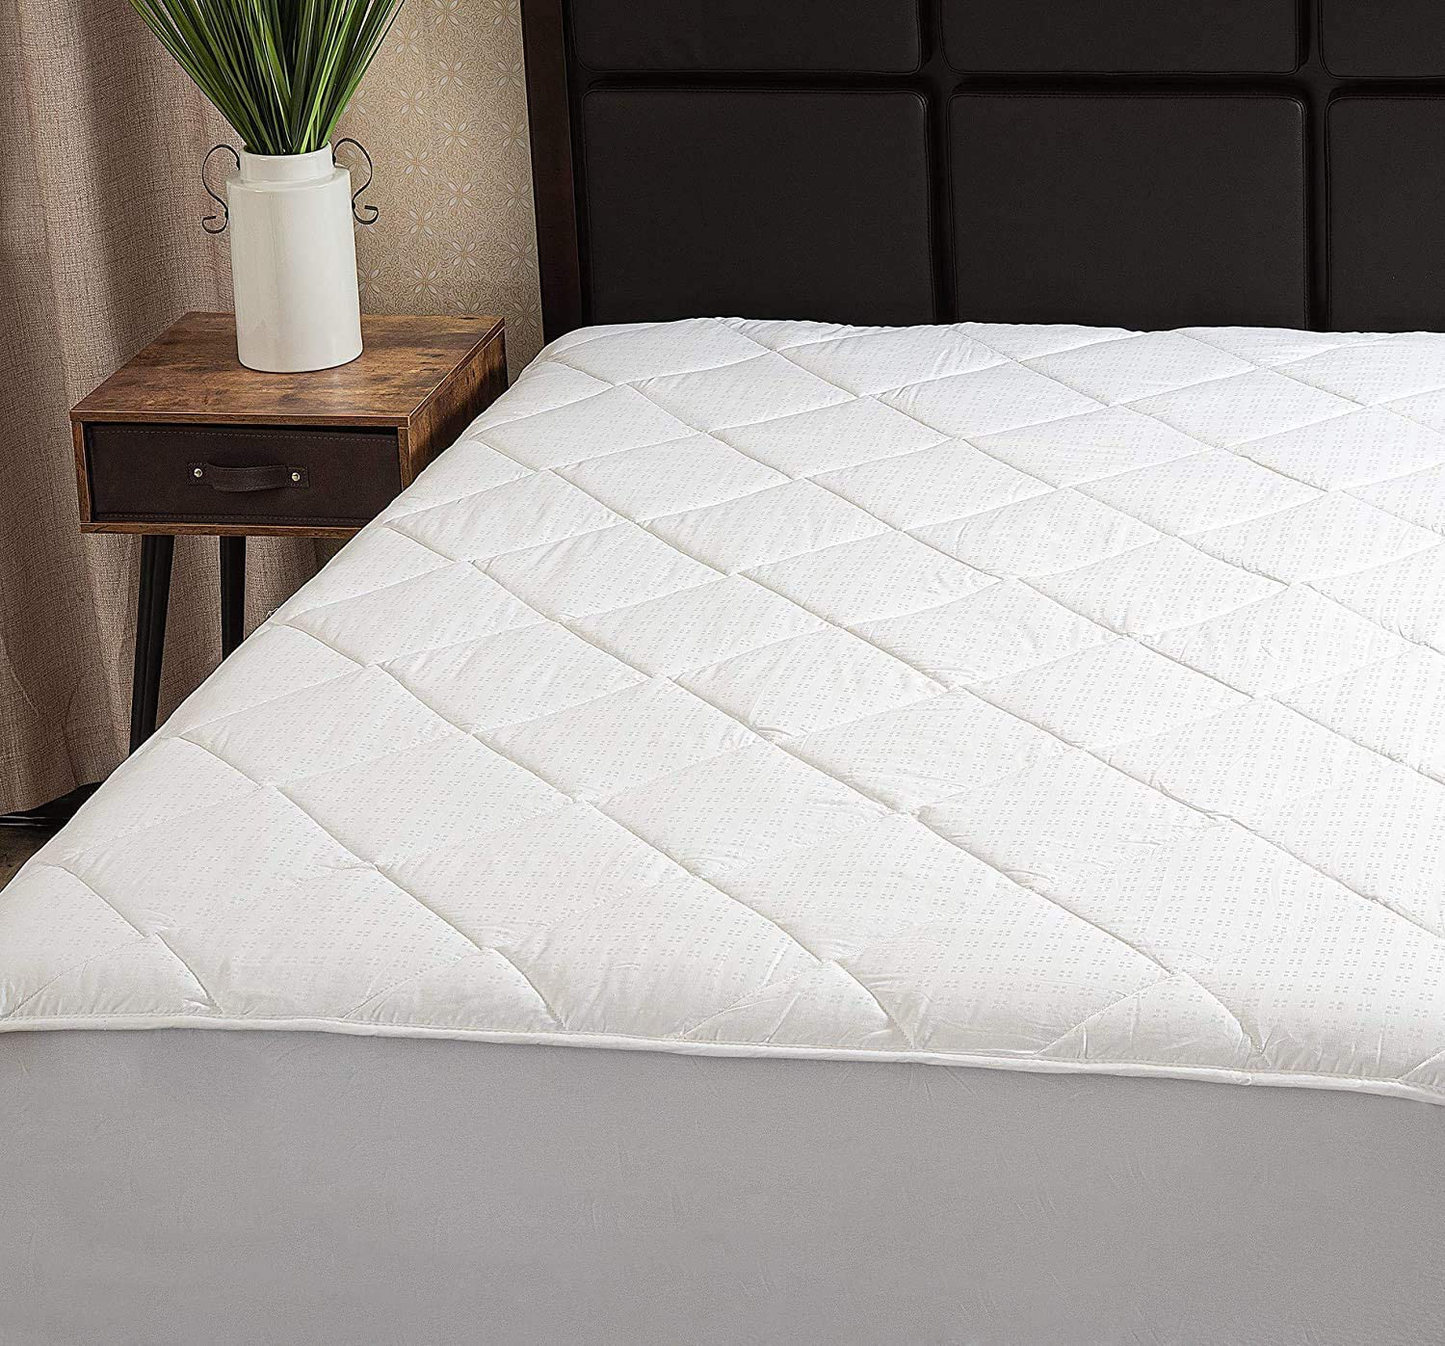 MAXI Queen Mattress Pad Topper Fitted | Down Alternative Mattress Cover, 100% Cotton Top, 300 TC Quilted | Highly Breathable, Full Coverage Bed Mattress Pad | Queen 60x80 Stretchable Up to 18"